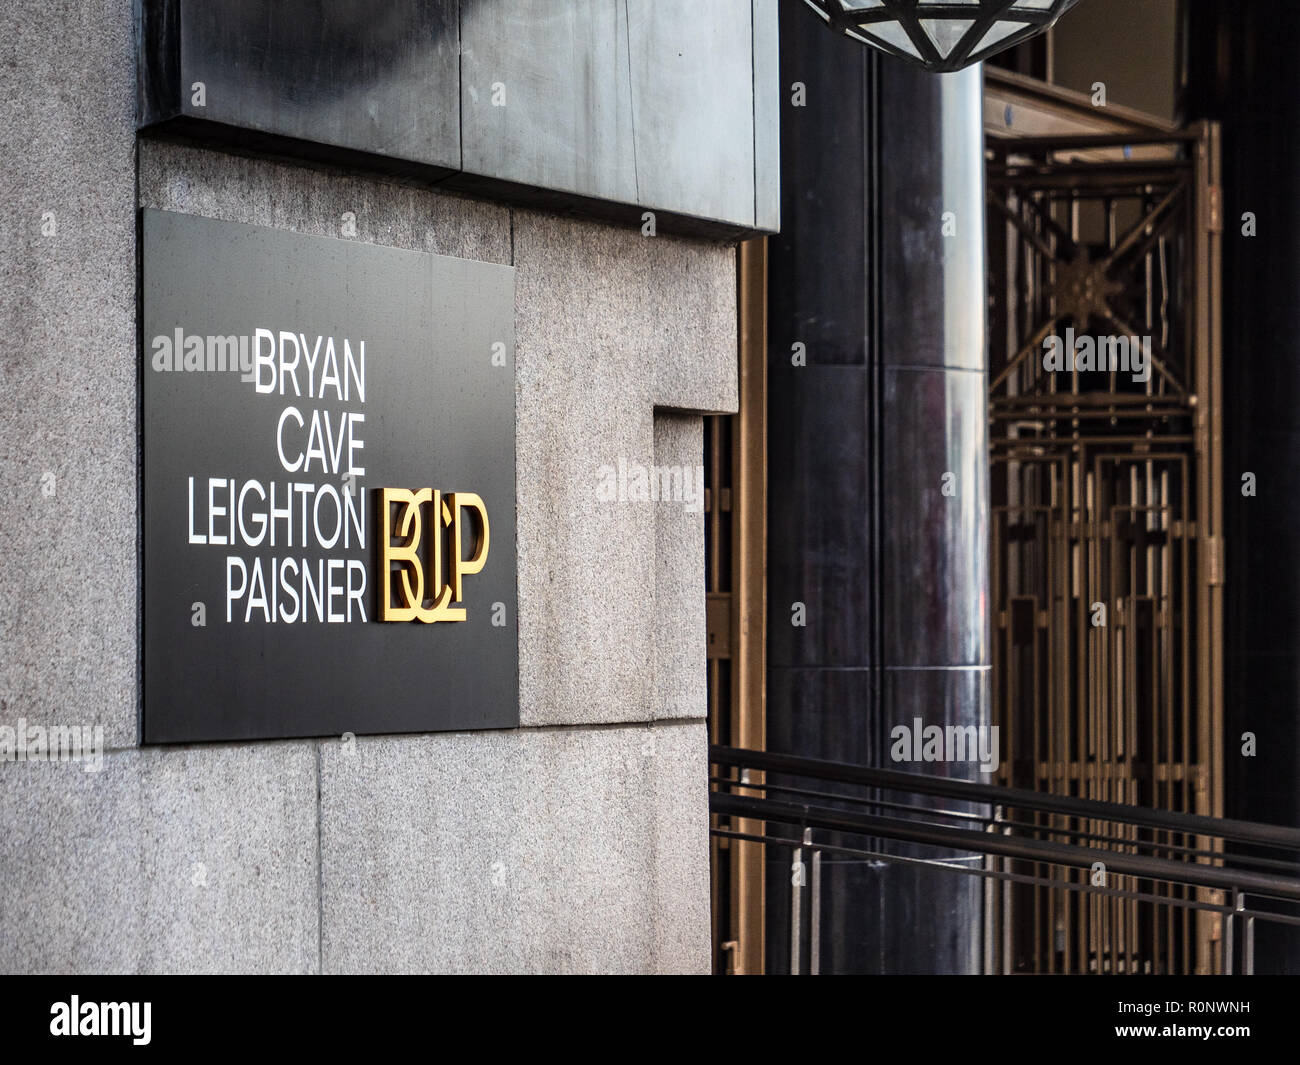 Bryan Cave Leighton Paisner London Offices - International Law firm based in St Louis, offices in the City of London Financial District Stock Photo